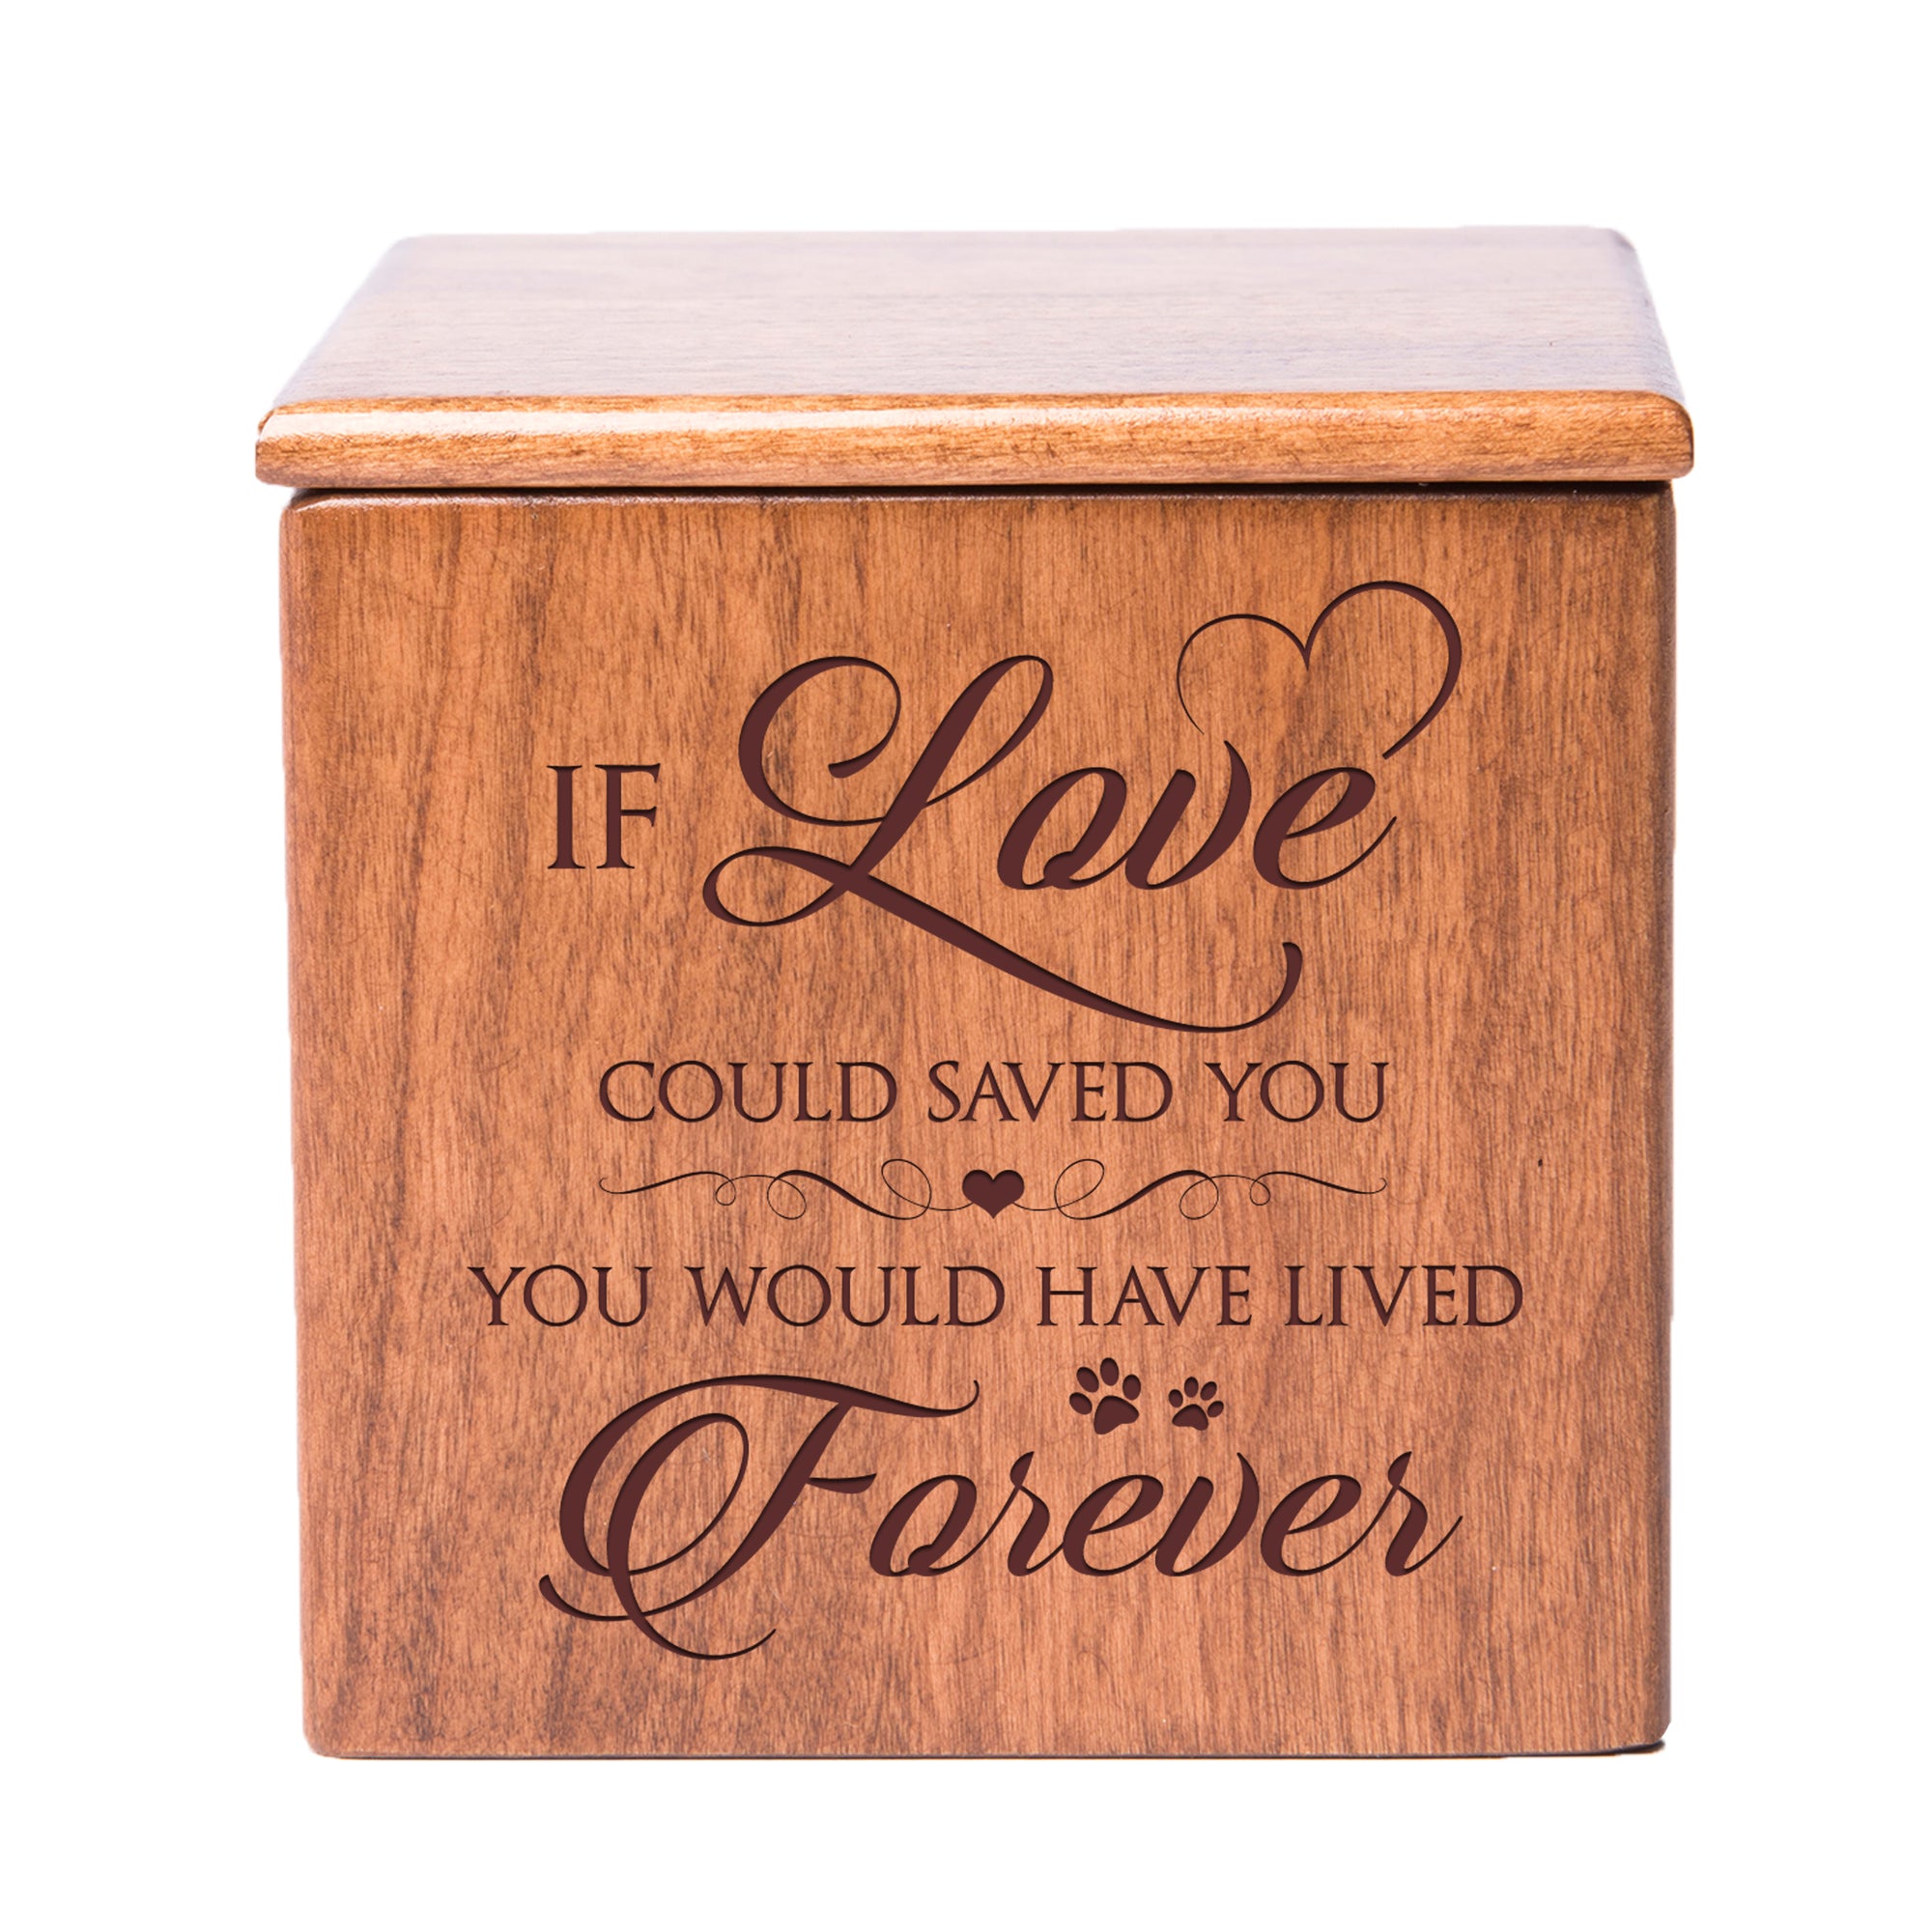 A small pet urn designed to hold the ashes of your beloved companion, elegantly crafted in wood with engraved details.